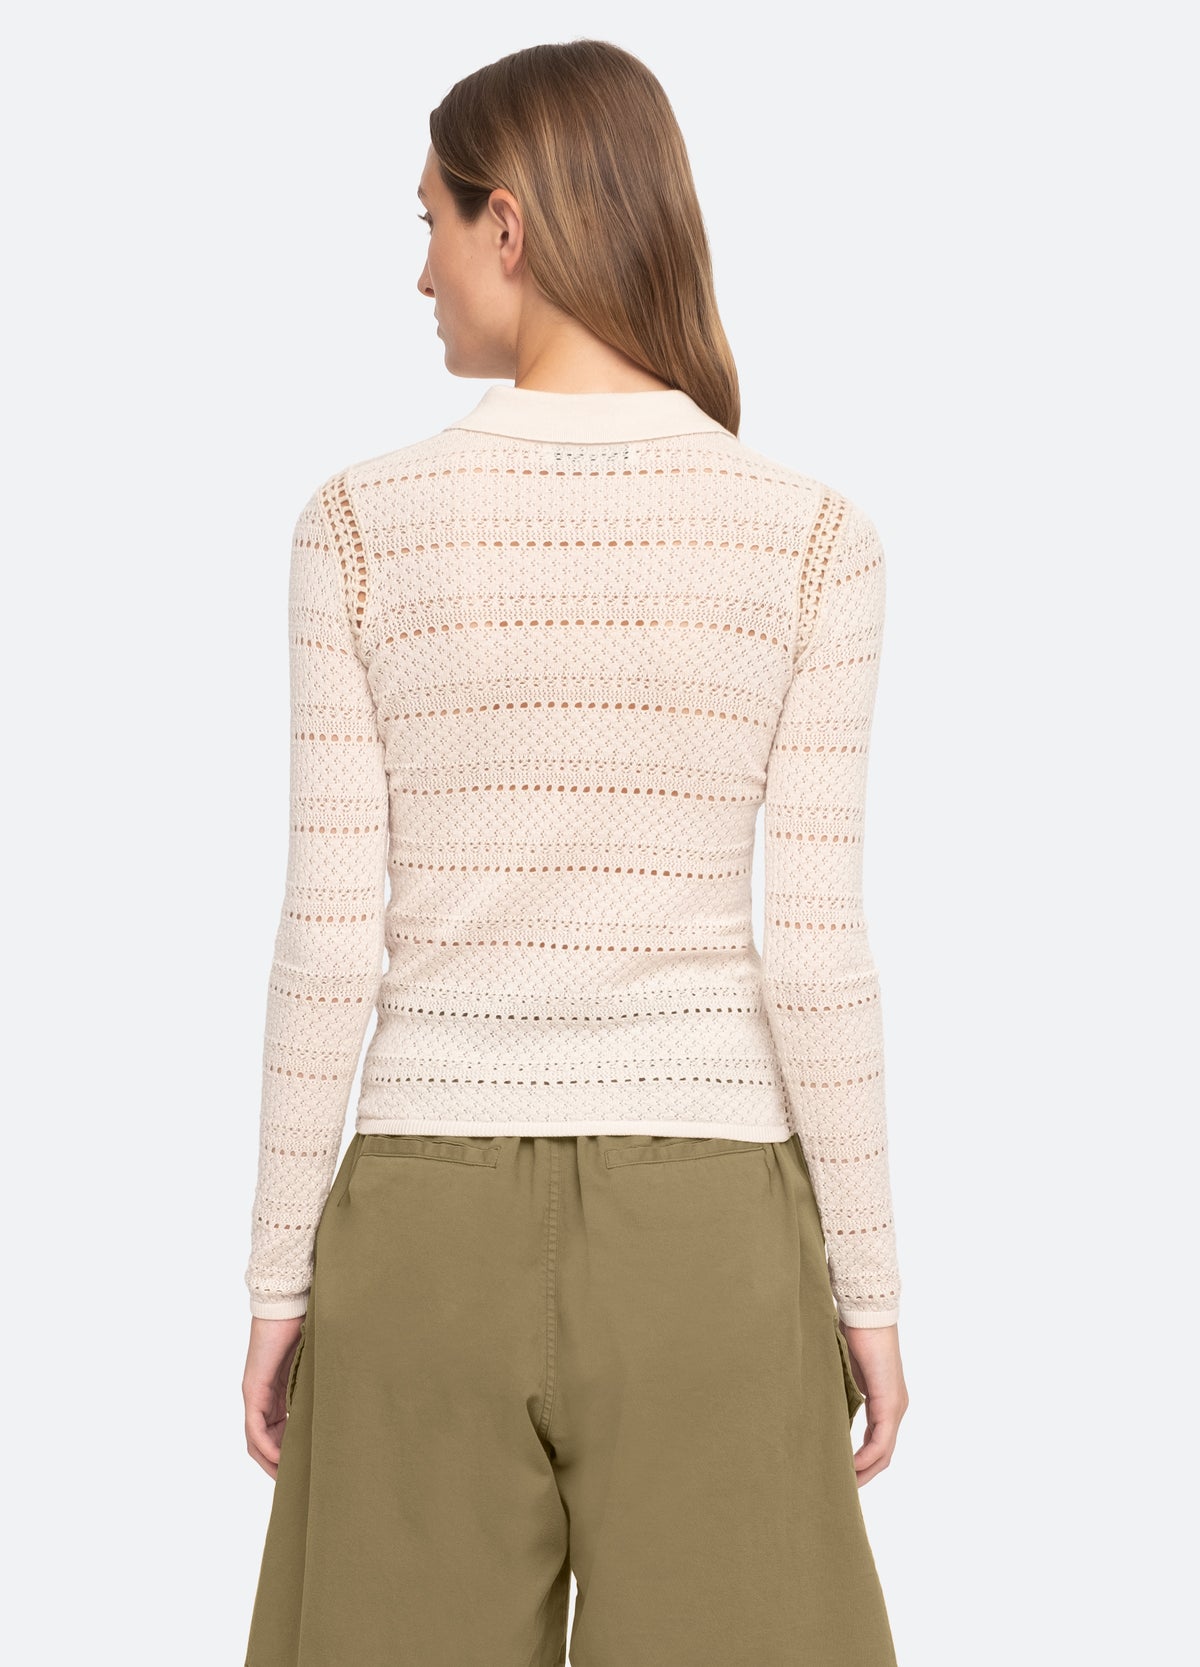 cream-syble sweater-back view - 2